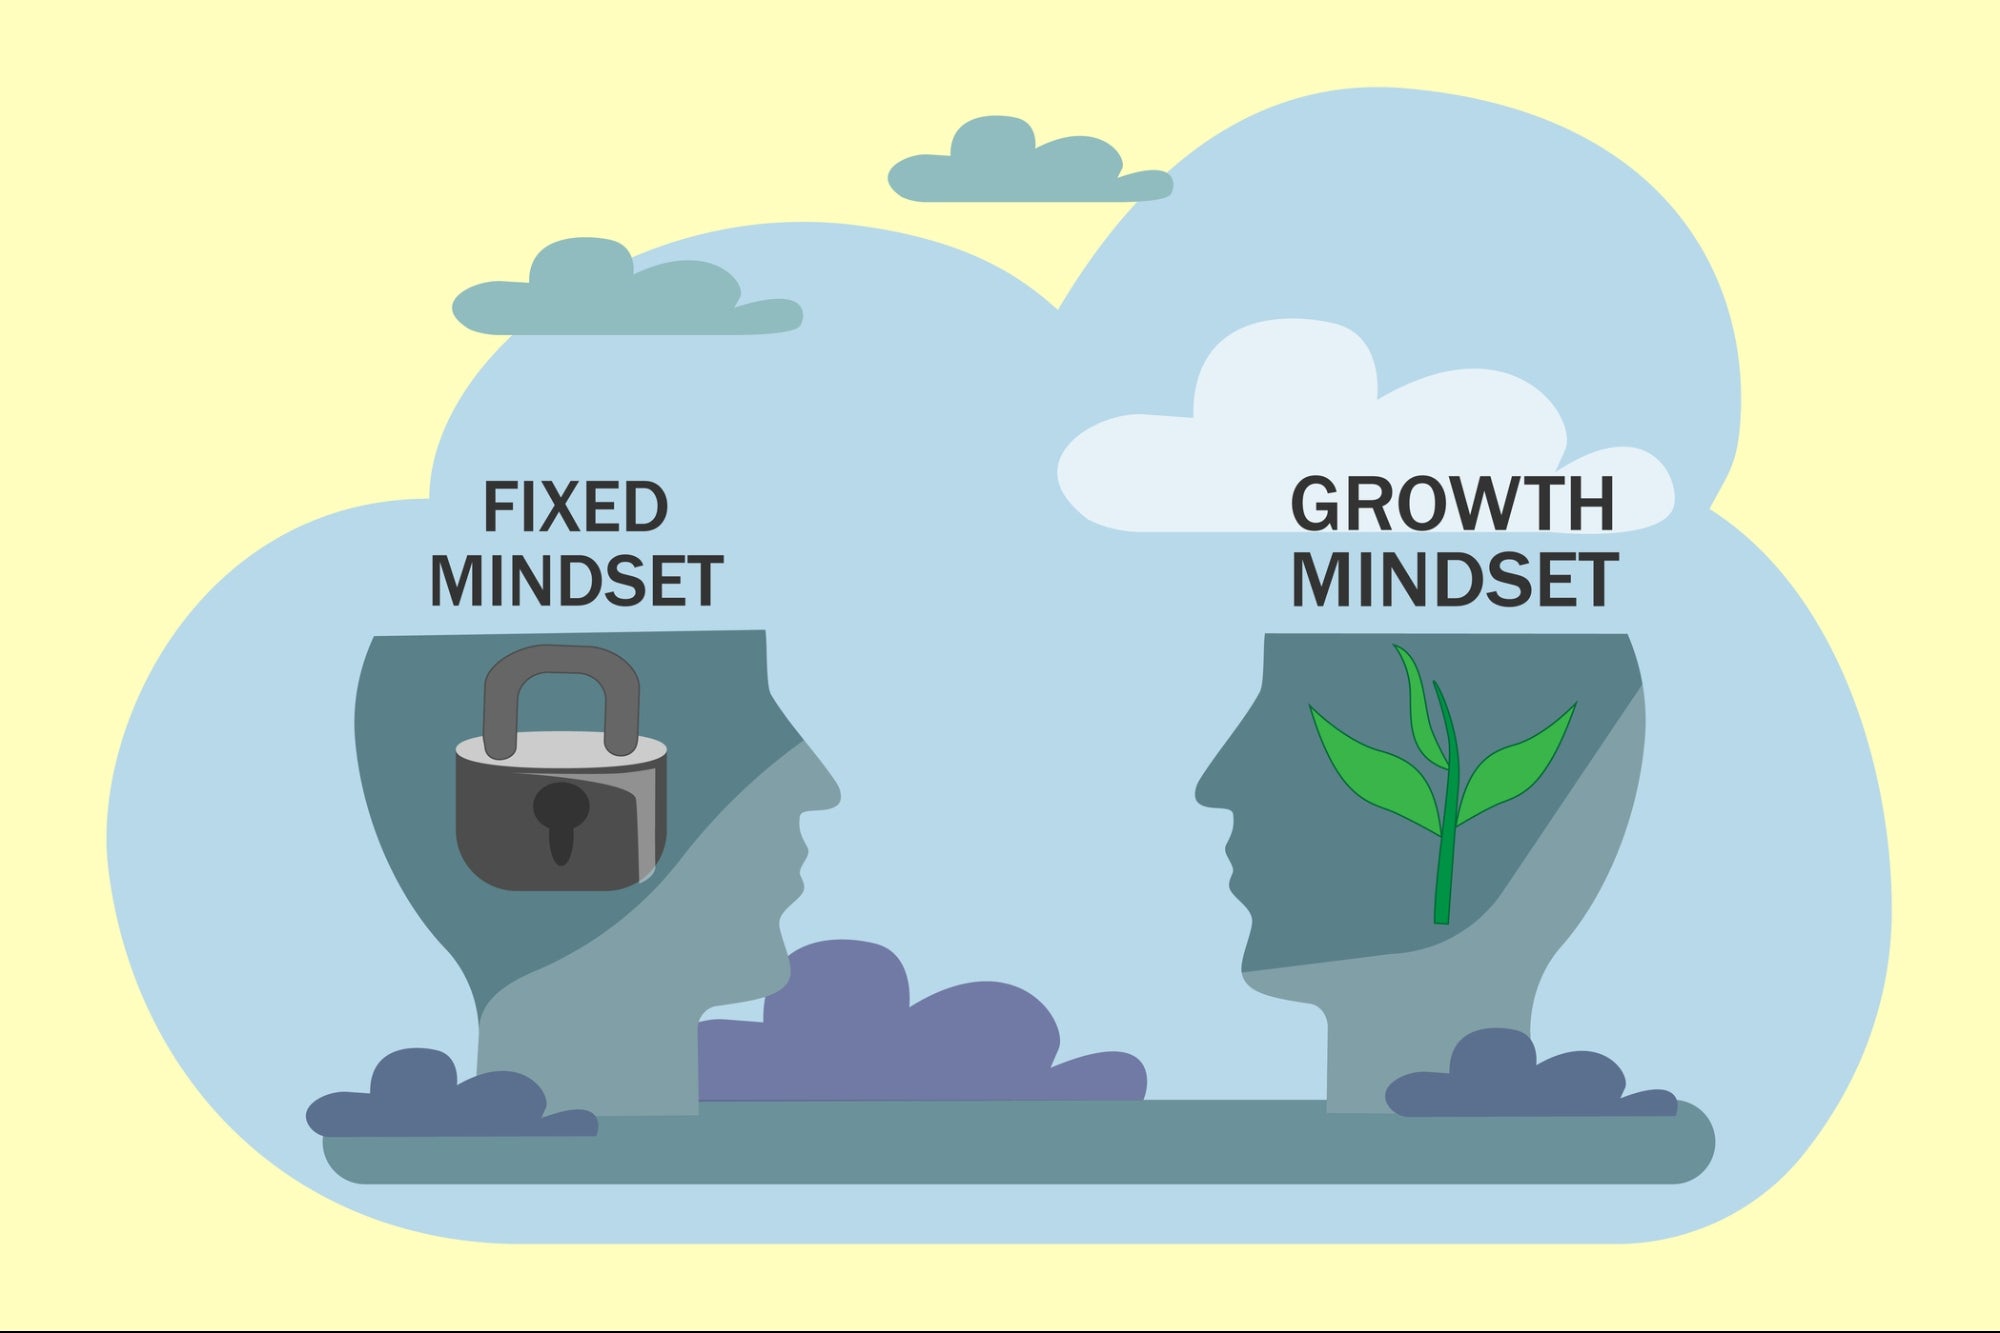 Growth Mindset vs. Fixed Mindset: What's the Difference?